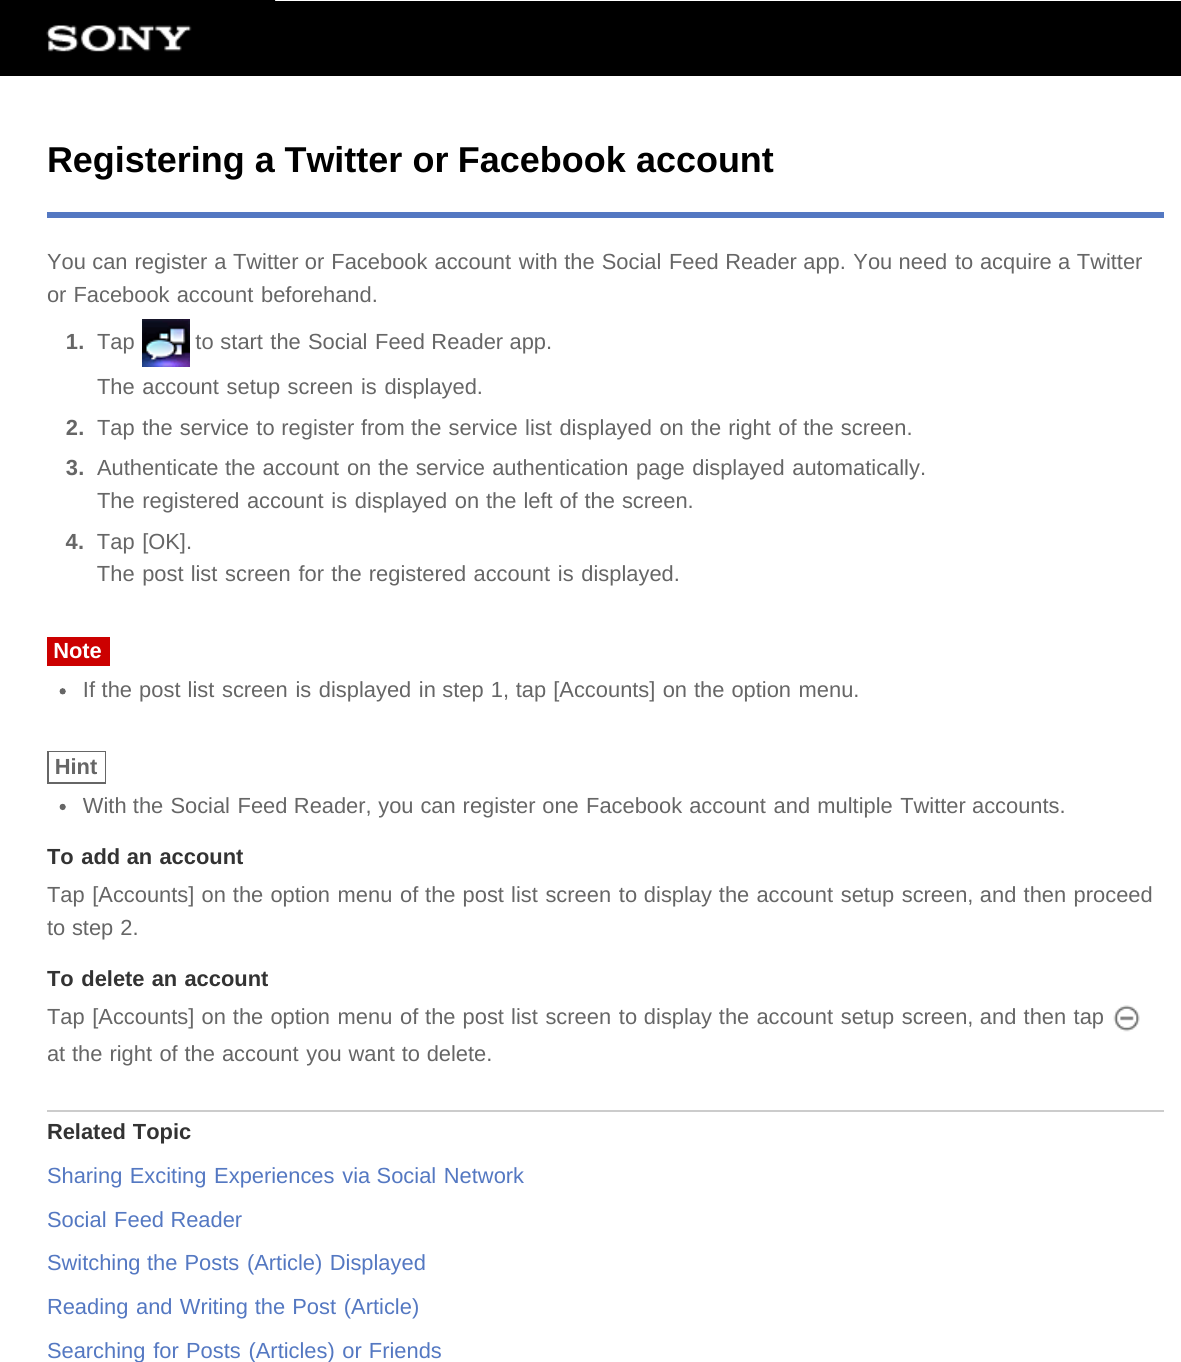 Registering a Twitter or Facebook accountYou can register a Twitter or Facebook account with the Social Feed Reader app. You need to acquire a Twitteror Facebook account beforehand.1.  Tap   to start the Social Feed Reader app.The account setup screen is displayed.2.  Tap the service to register from the service list displayed on the right of the screen.3.  Authenticate the account on the service authentication page displayed automatically.The registered account is displayed on the left of the screen.4.  Tap [OK].The post list screen for the registered account is displayed.NoteIf the post list screen is displayed in step 1, tap [Accounts] on the option menu.HintWith the Social Feed Reader, you can register one Facebook account and multiple Twitter accounts.To add an accountTap [Accounts] on the option menu of the post list screen to display the account setup screen, and then proceedto step 2.To delete an accountTap [Accounts] on the option menu of the post list screen to display the account setup screen, and then tap at the right of the account you want to delete.Related TopicSharing Exciting Experiences via Social NetworkSocial Feed ReaderSwitching the Posts (Article) DisplayedReading and Writing the Post (Article)Searching for Posts (Articles) or Friends